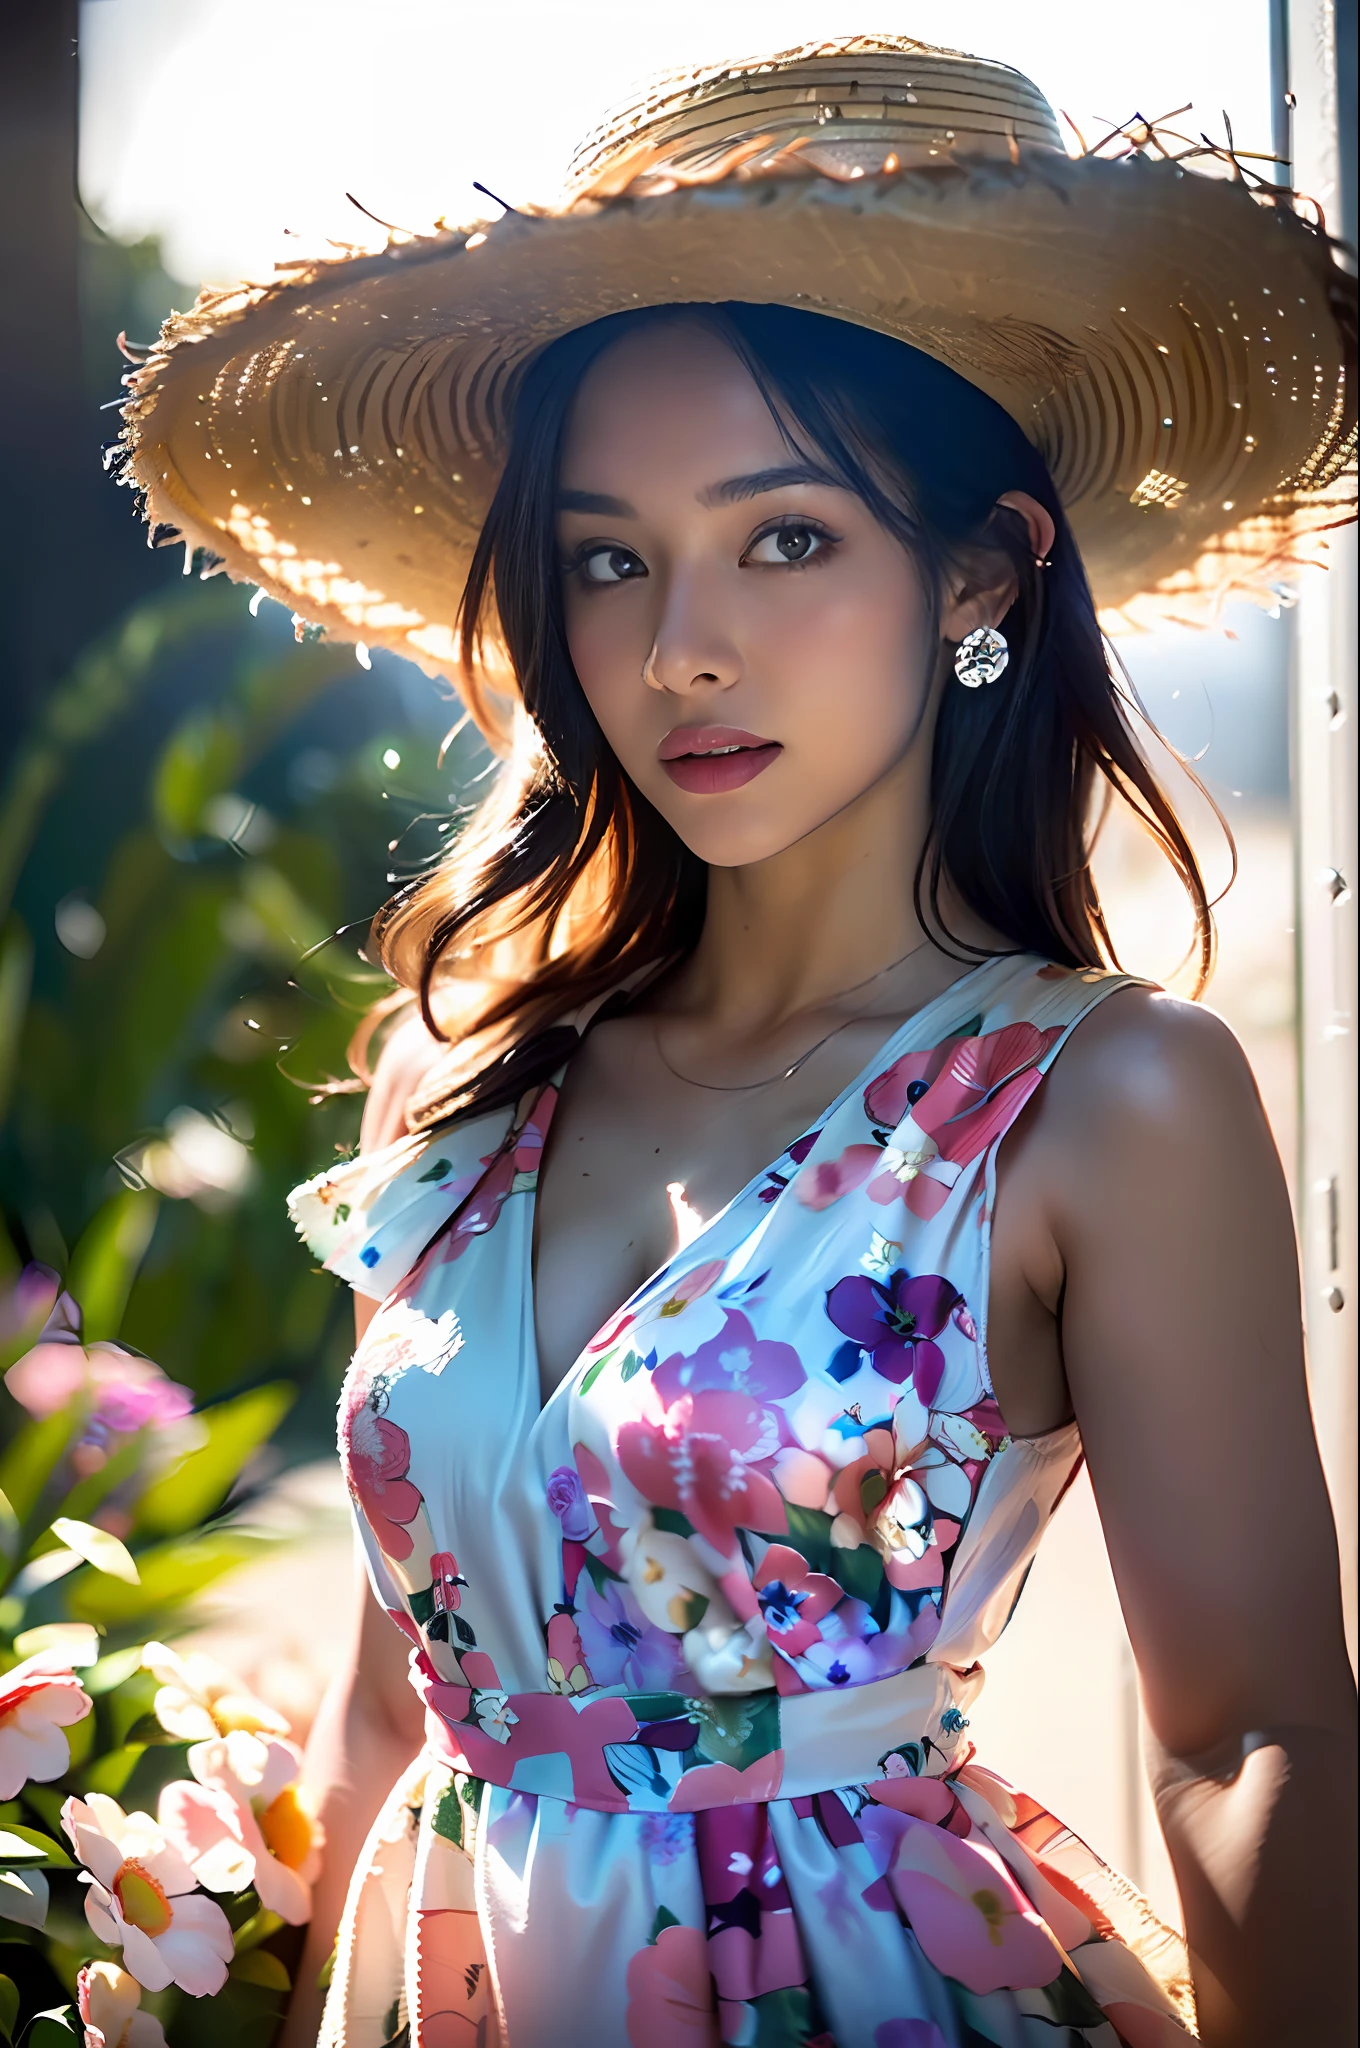 (1girl surrounded by soft_light:1.5), (backlighting:1.8), (lighting),(flowing fabric:1.3), ((Floral_summer_dress:1.5),(Straw_hat:1.3)),
(masterpiece), realistic, HDR, highly detailed, 8k, raw photo, ambient occlusion, natural, harmonious composition, warm tones, fine art photography,